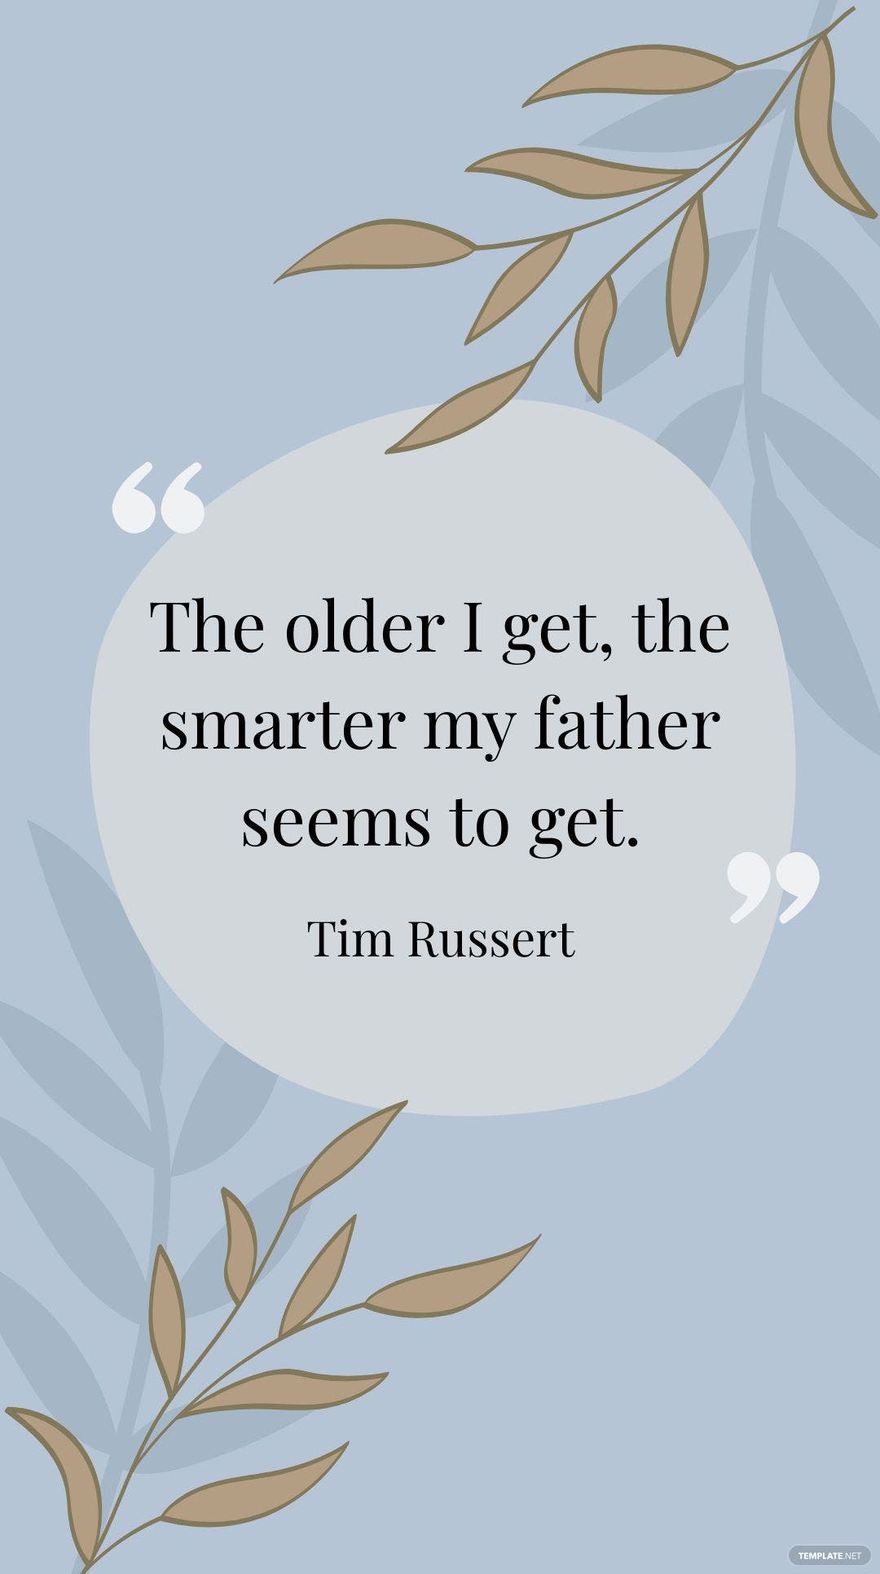 Tim Russert - “The older I get, the smarter my father seems to get.” in JPG